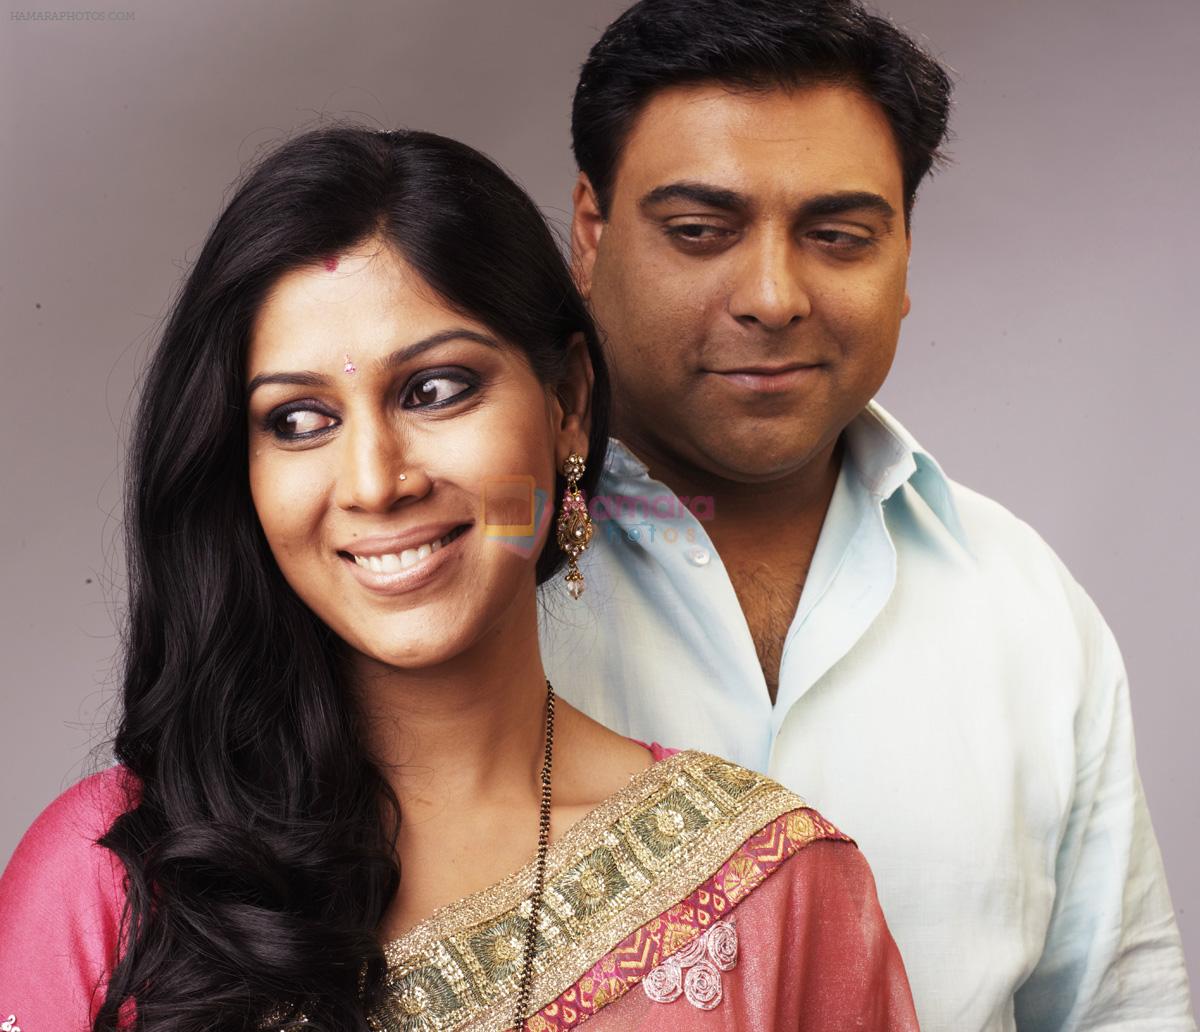 Ram Kapoor and Sakshi Tanwar at an event in Bade Achhe Lagte Hain. - Pic 1